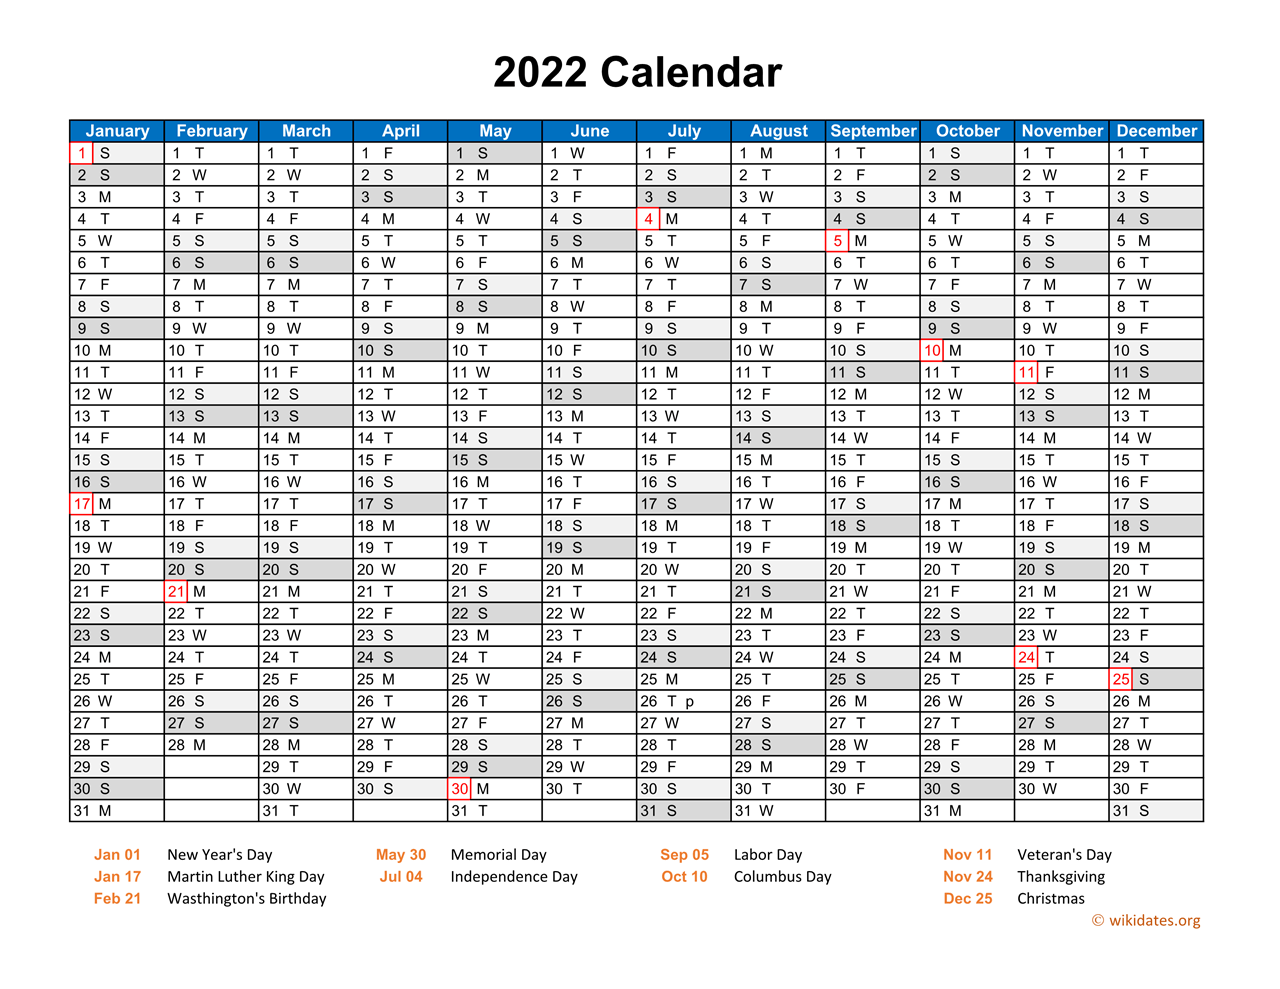 One Page Year Calendar 2022 2022 Calendar Horizontal, One Page | Wikidates.org